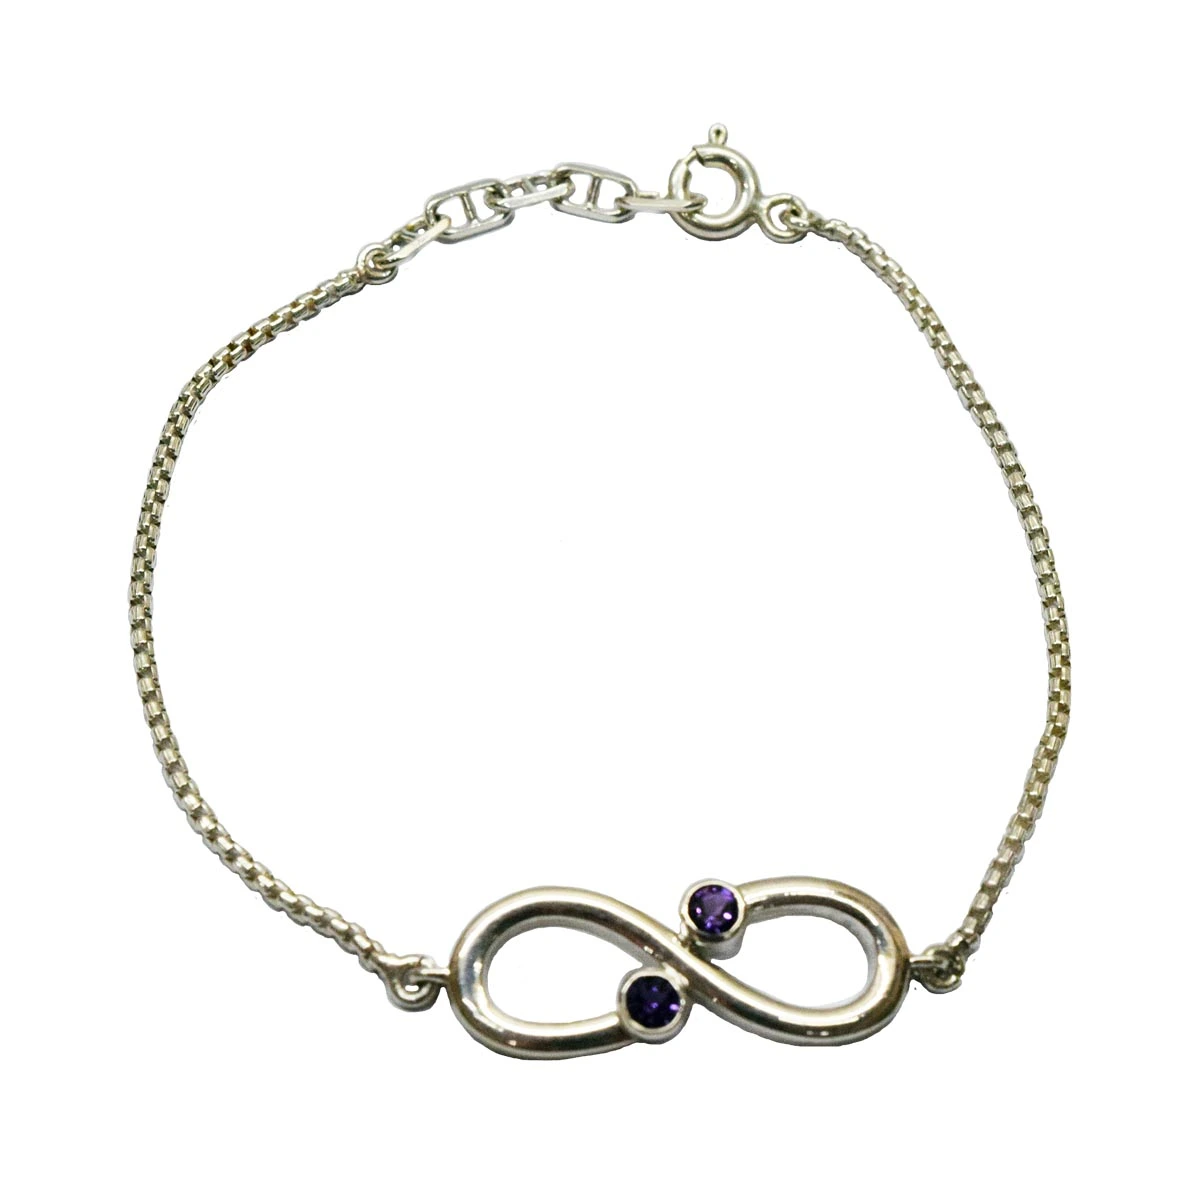 Real Purple Amethyst Halo Sterling Silver Bracelet for Women and Girls (SLBR13)